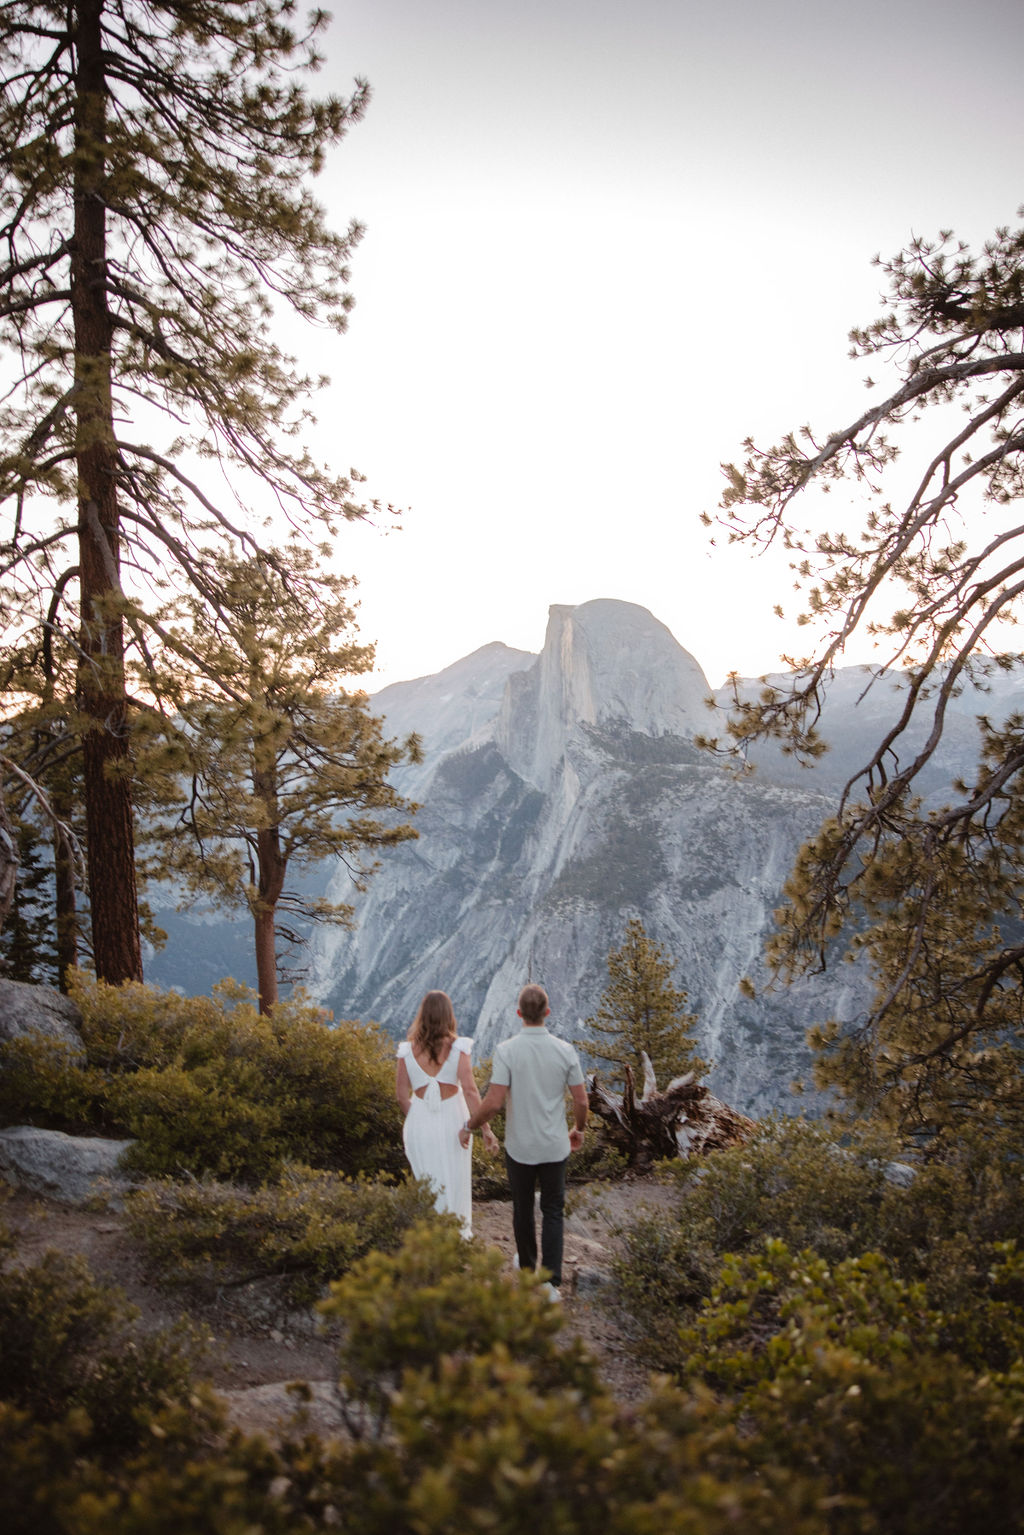 A couple stands embracing amidst trees, with a mountain range featuring a prominent rock formation in the background during their Glacier Point engagement photos